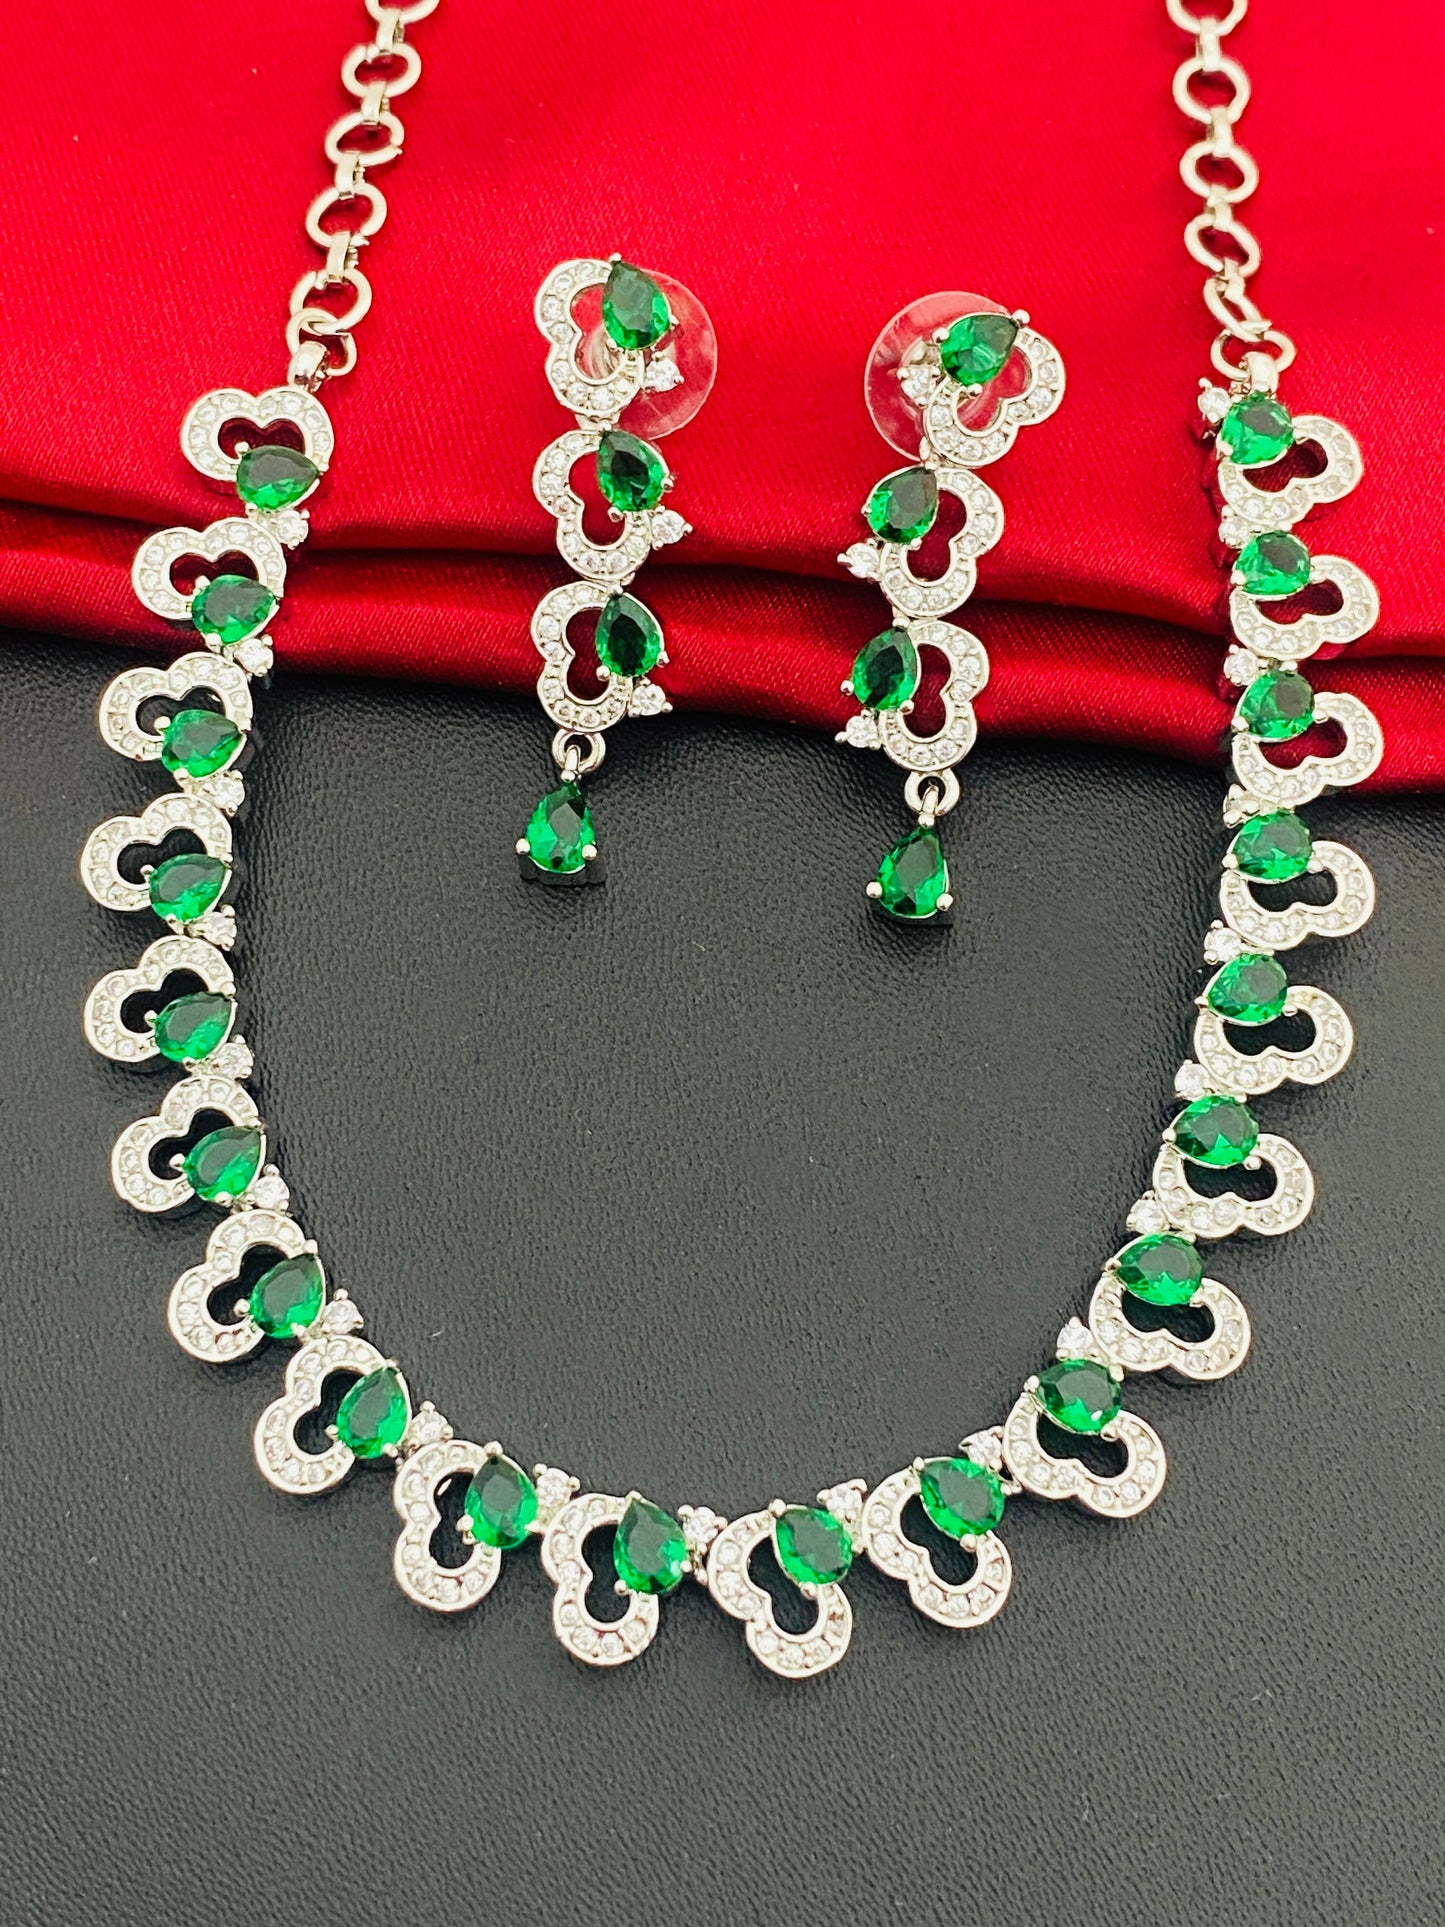 American Diamond Necklace And Earrings With Green Color In Mesa